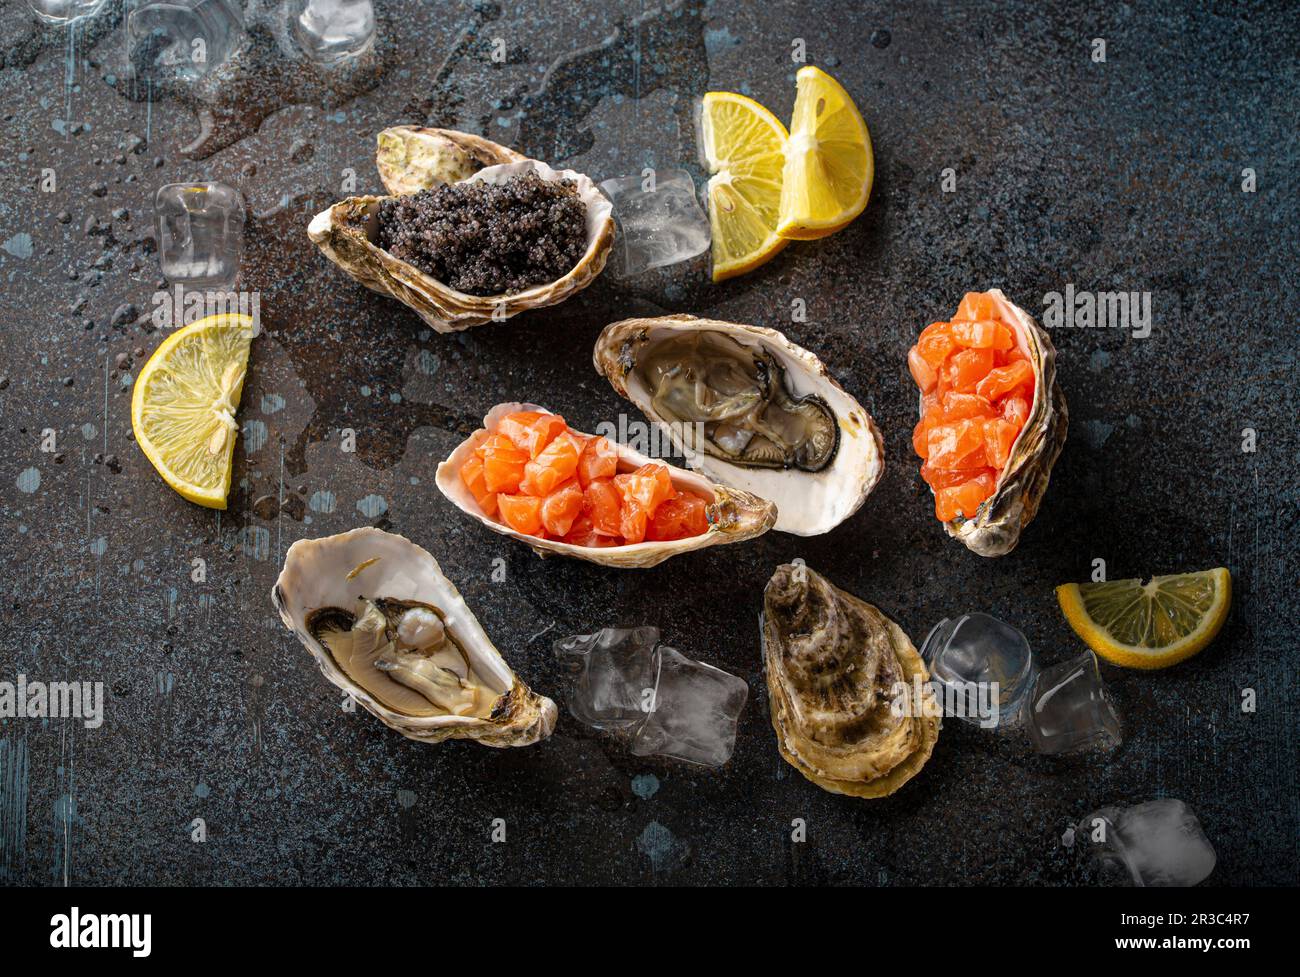 Seafood starters and appetizers: fresh open oysters, black caviar, and salmon tartare Stock Photo